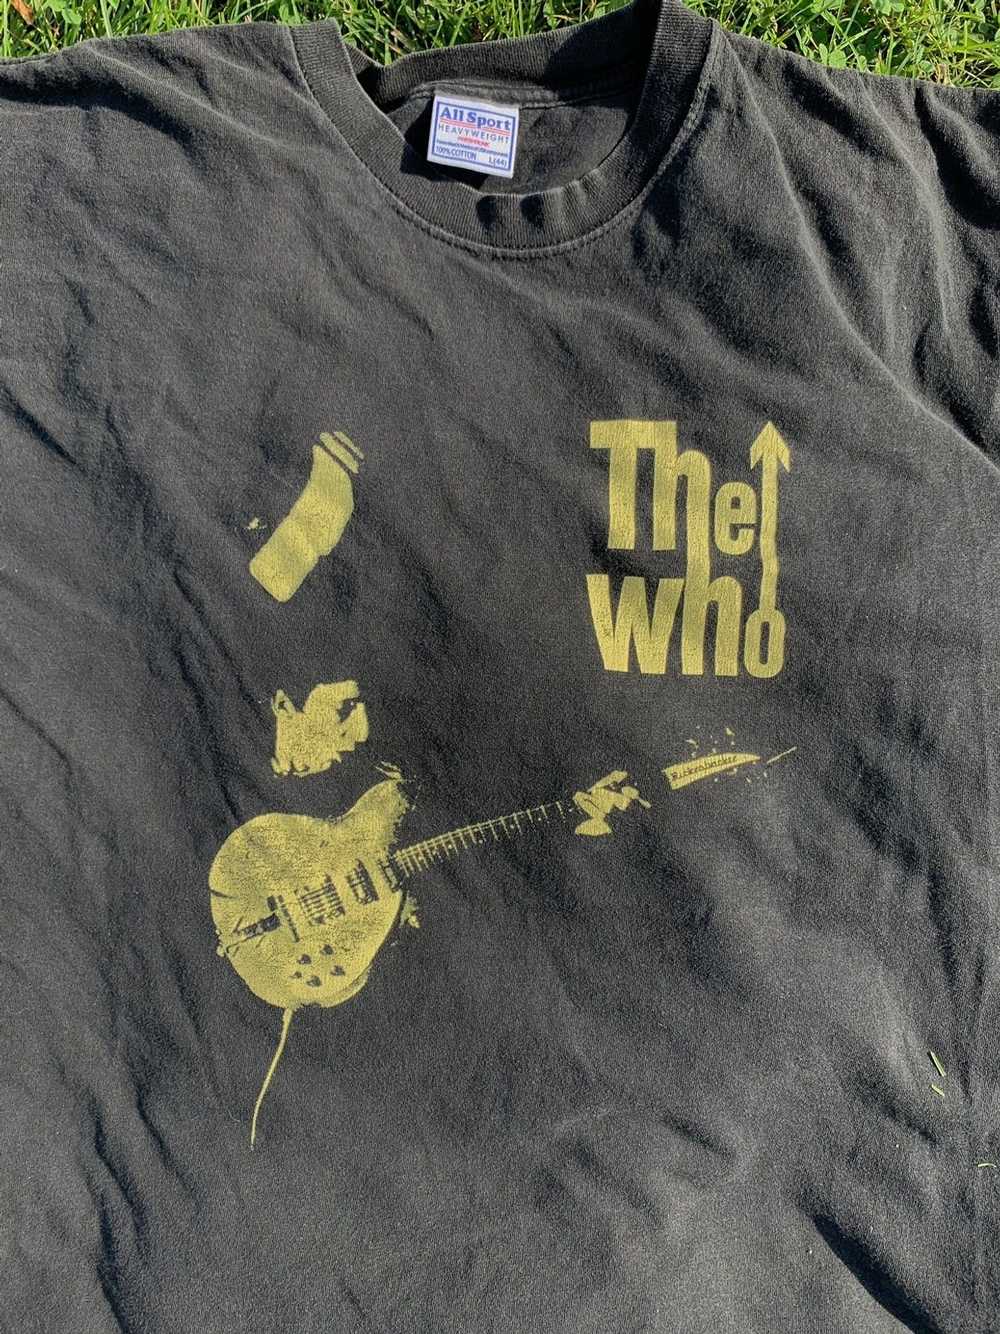 All Sport × Band Tees × Vintage VINTAGE THE WHO 2… - image 4